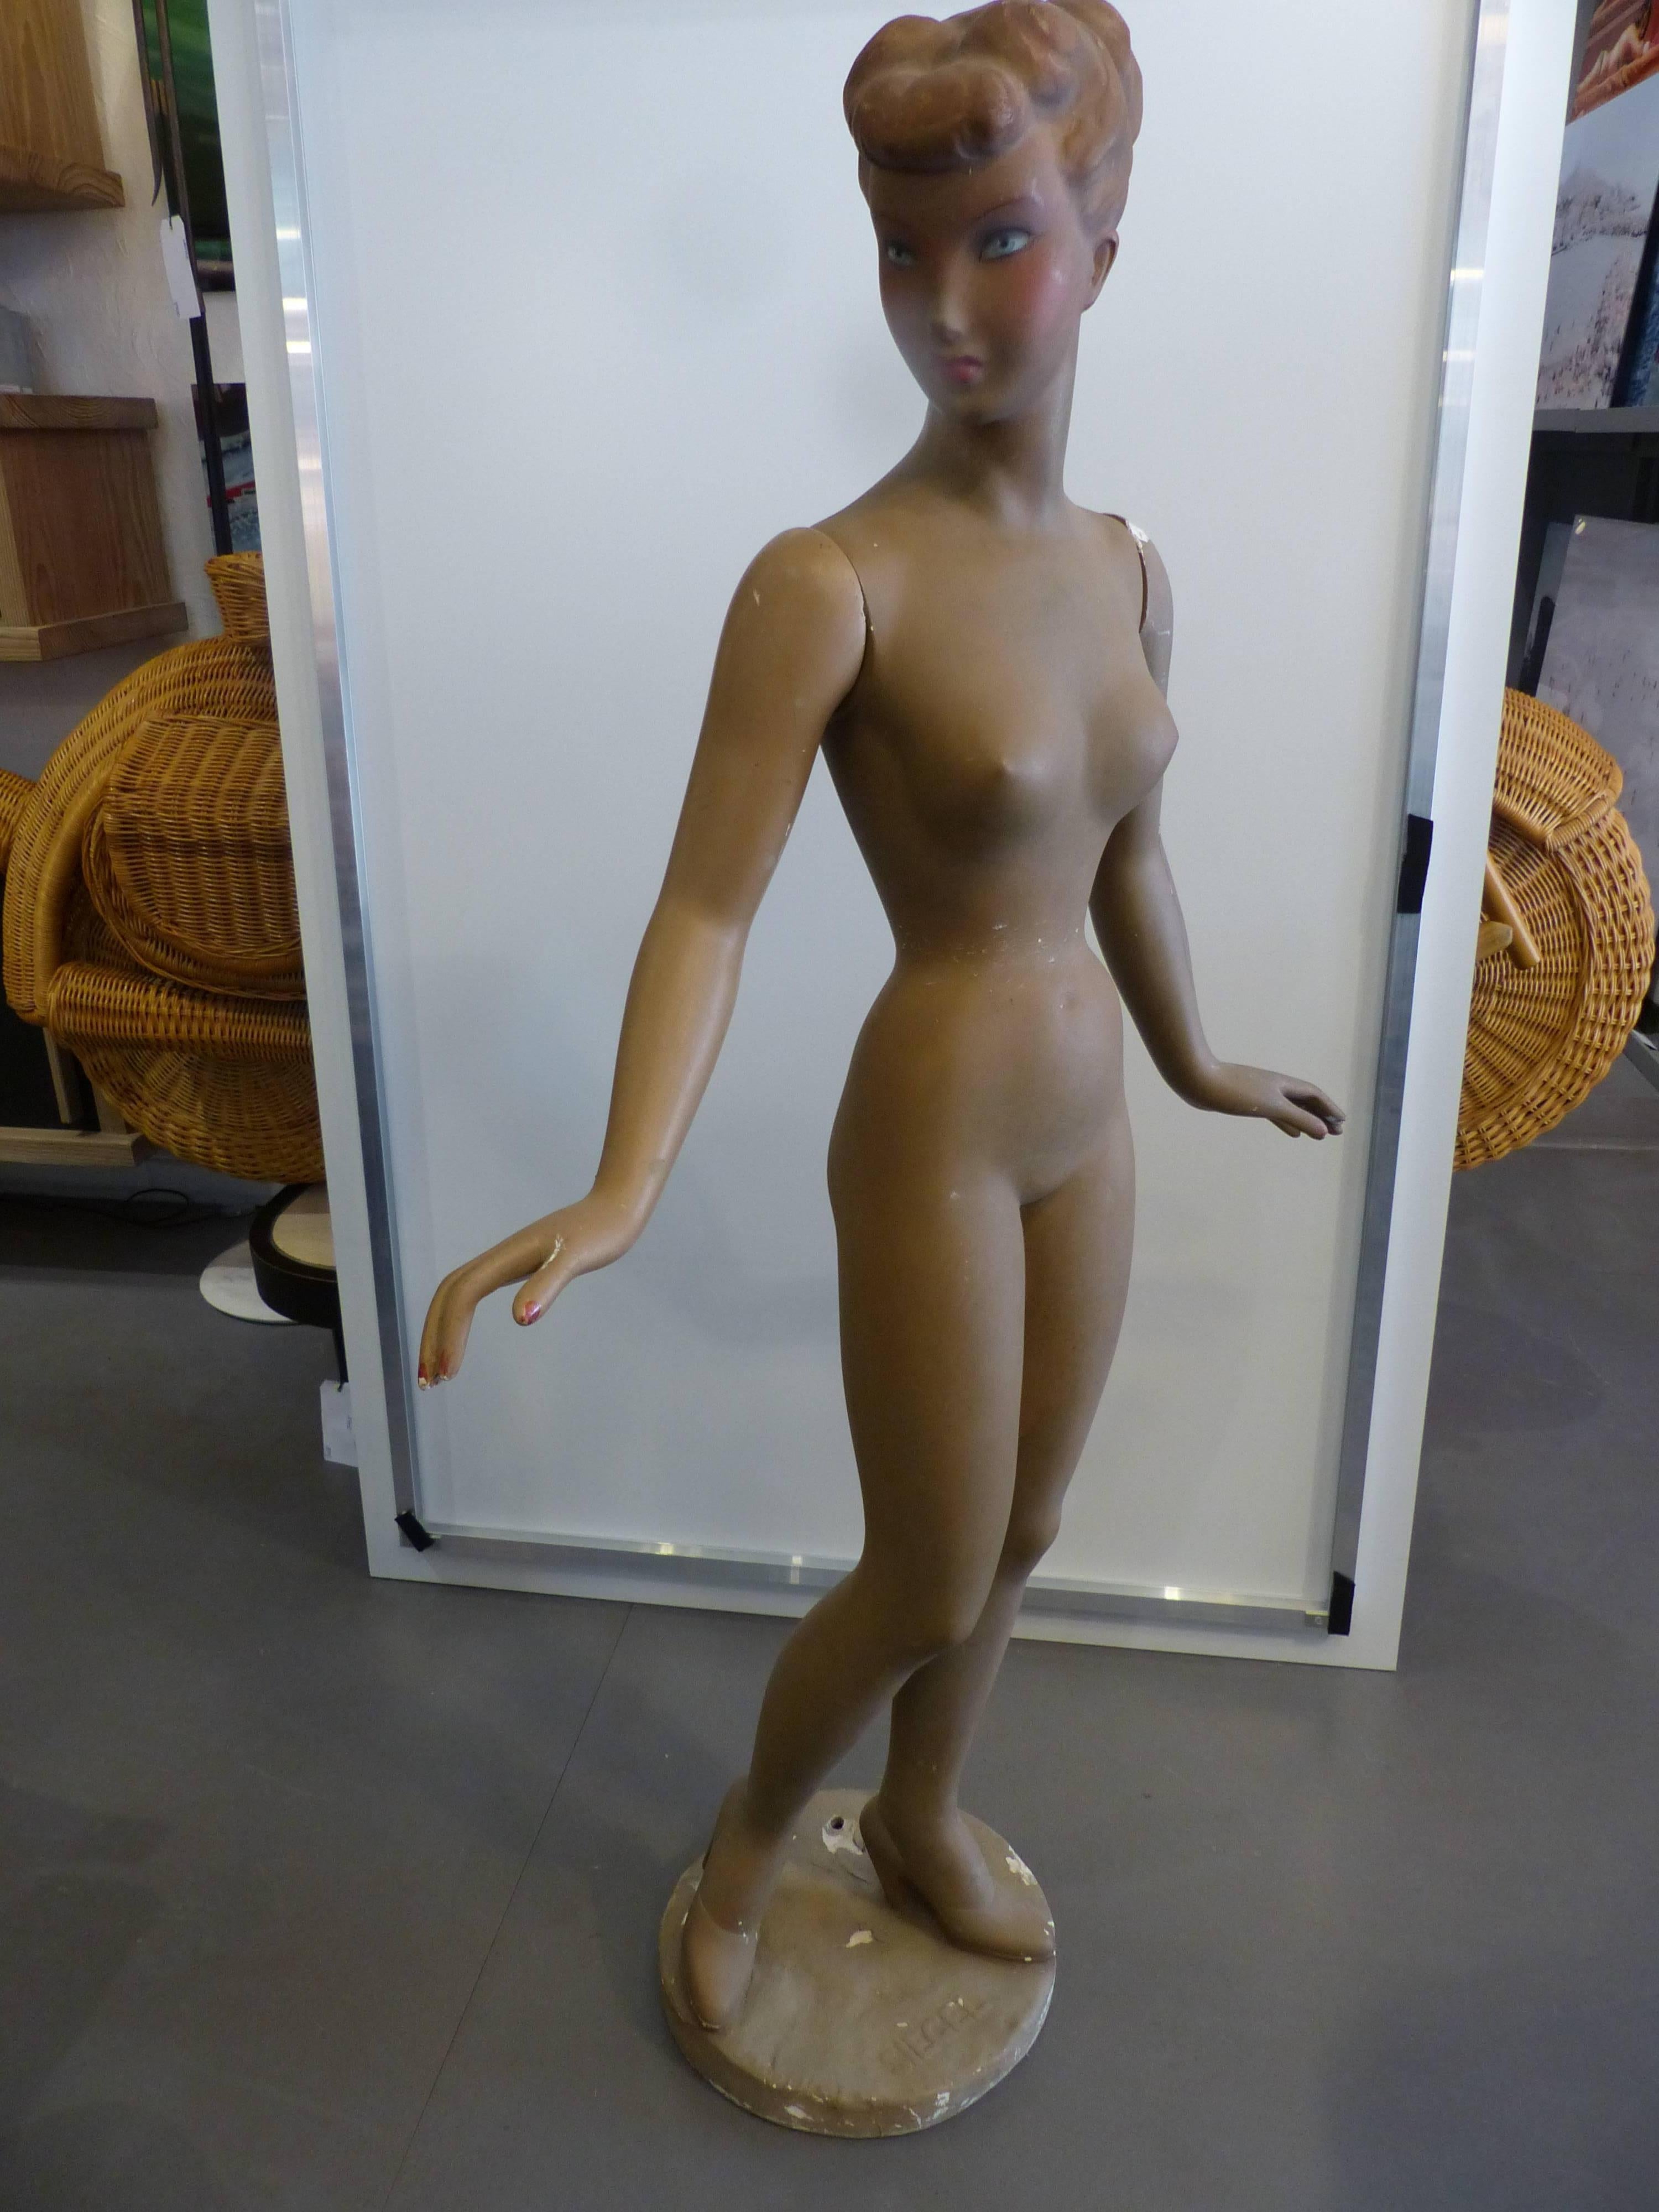 Fantastic Siegel plaster shop mannequin, circa 1950
Good condition, minor losses and cracks visible on the photos.